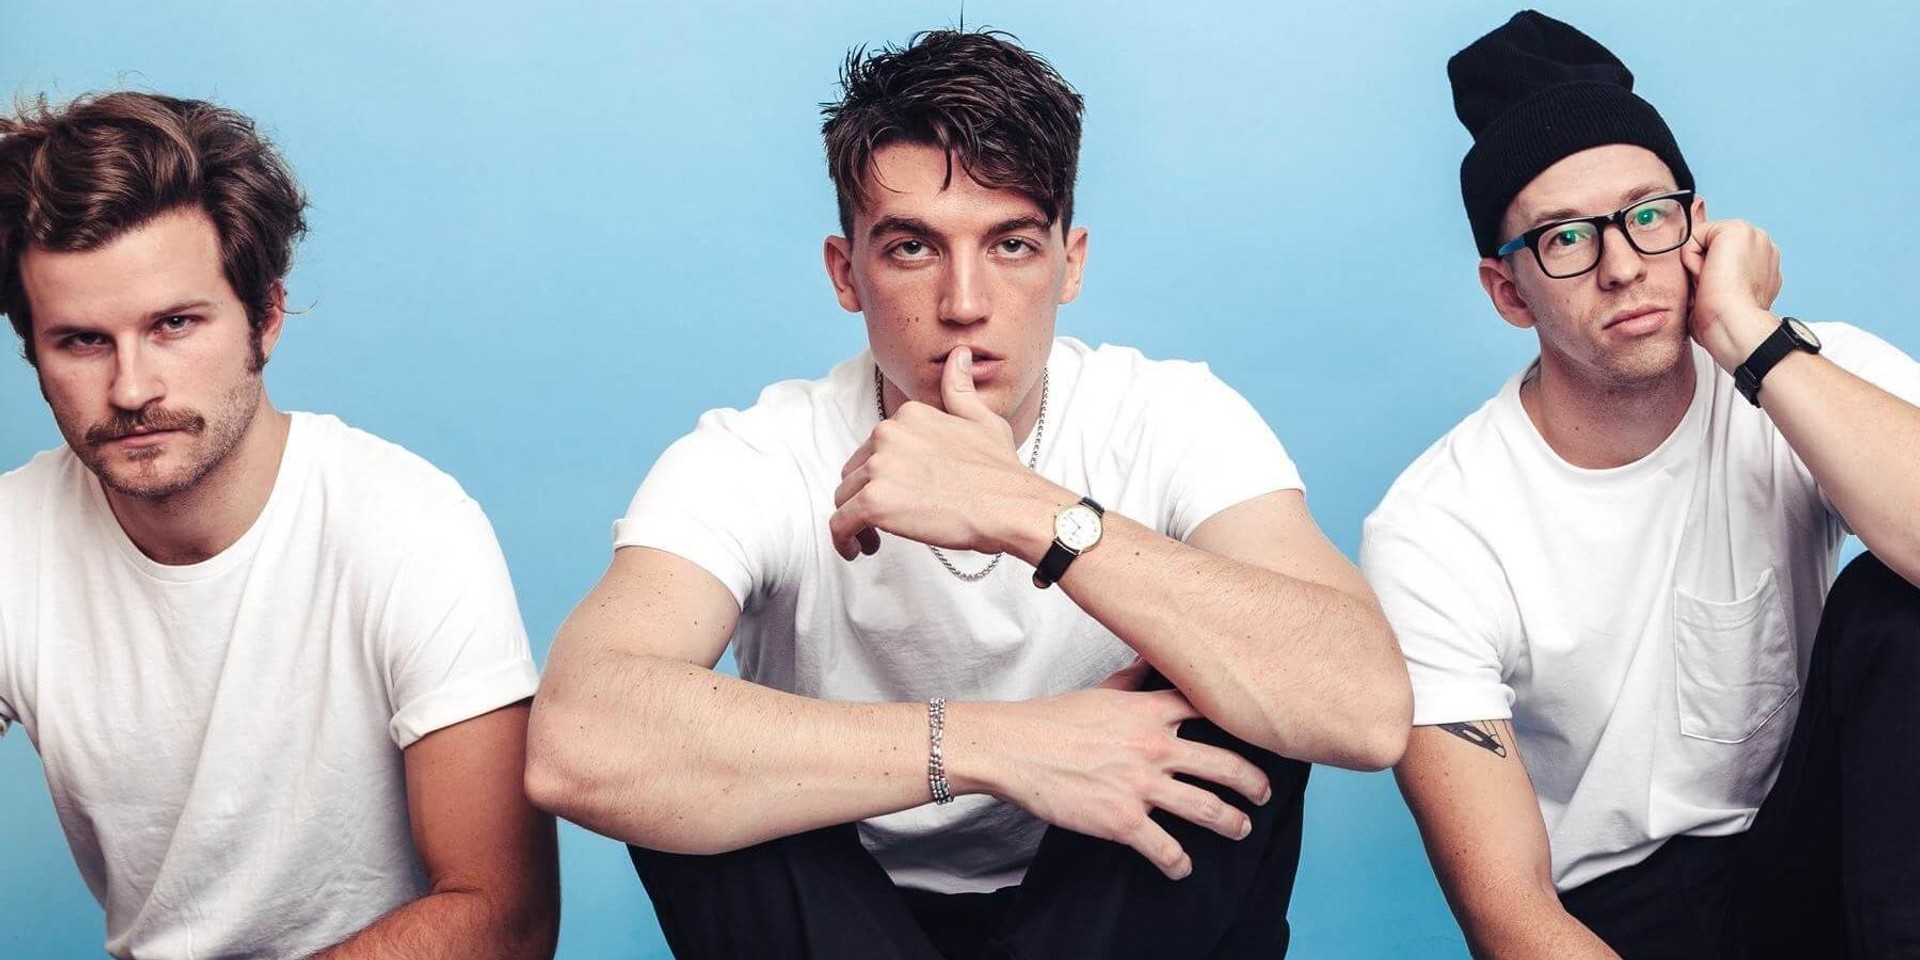 Tickets and venue for LANY's Singapore show announced